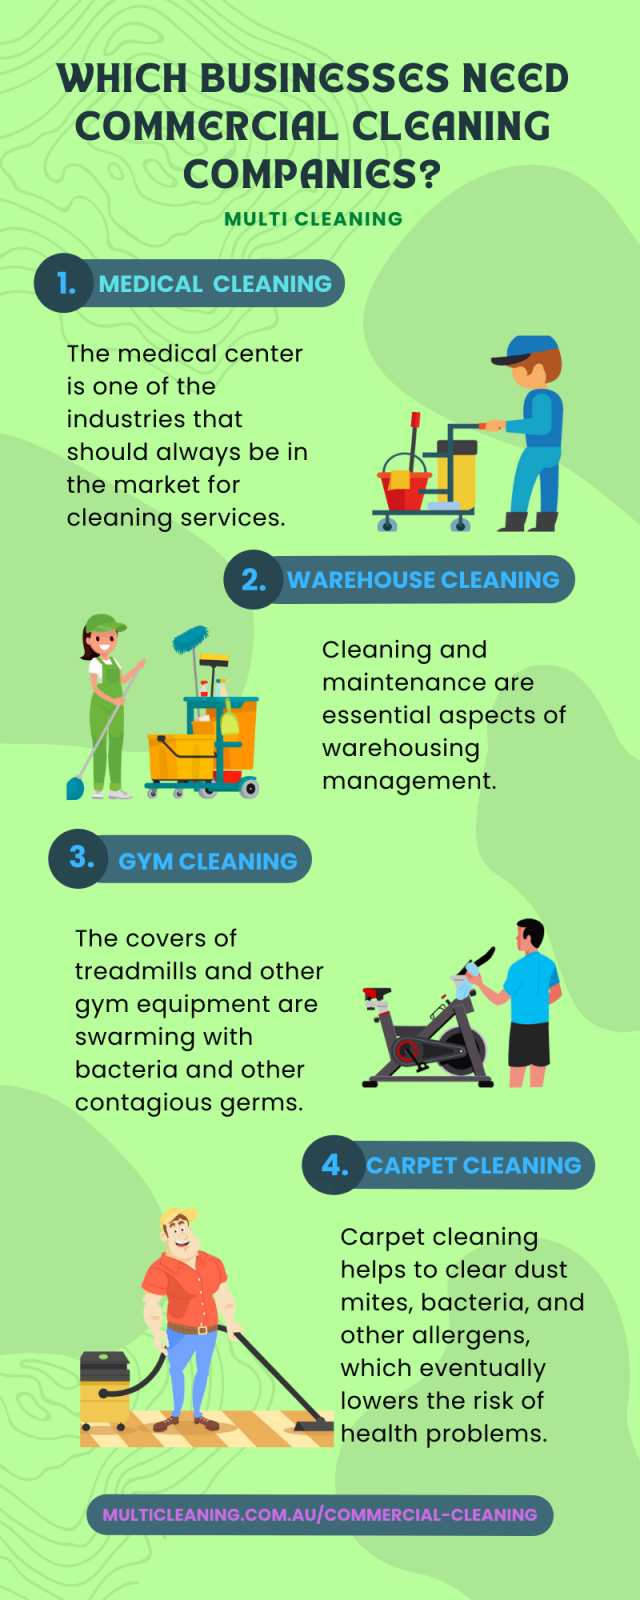 Which Businesses Need Commercial Cleaning Companies?